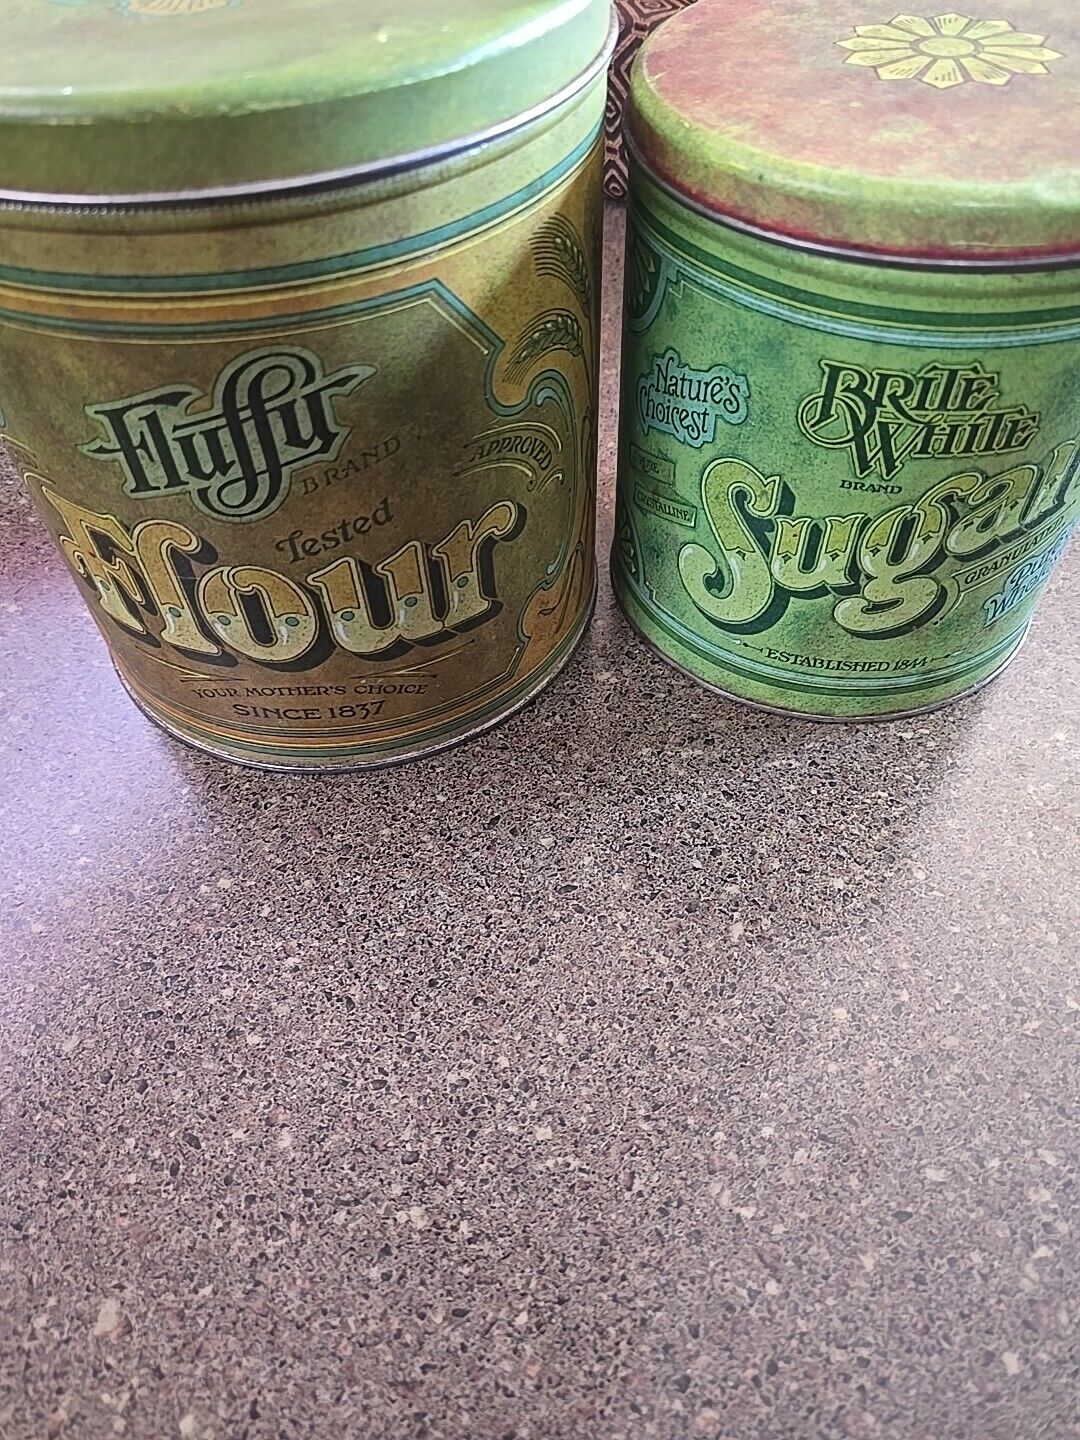 2 Vintage Canister Fluffy Flour and Brite White Sugar Nesting Tins